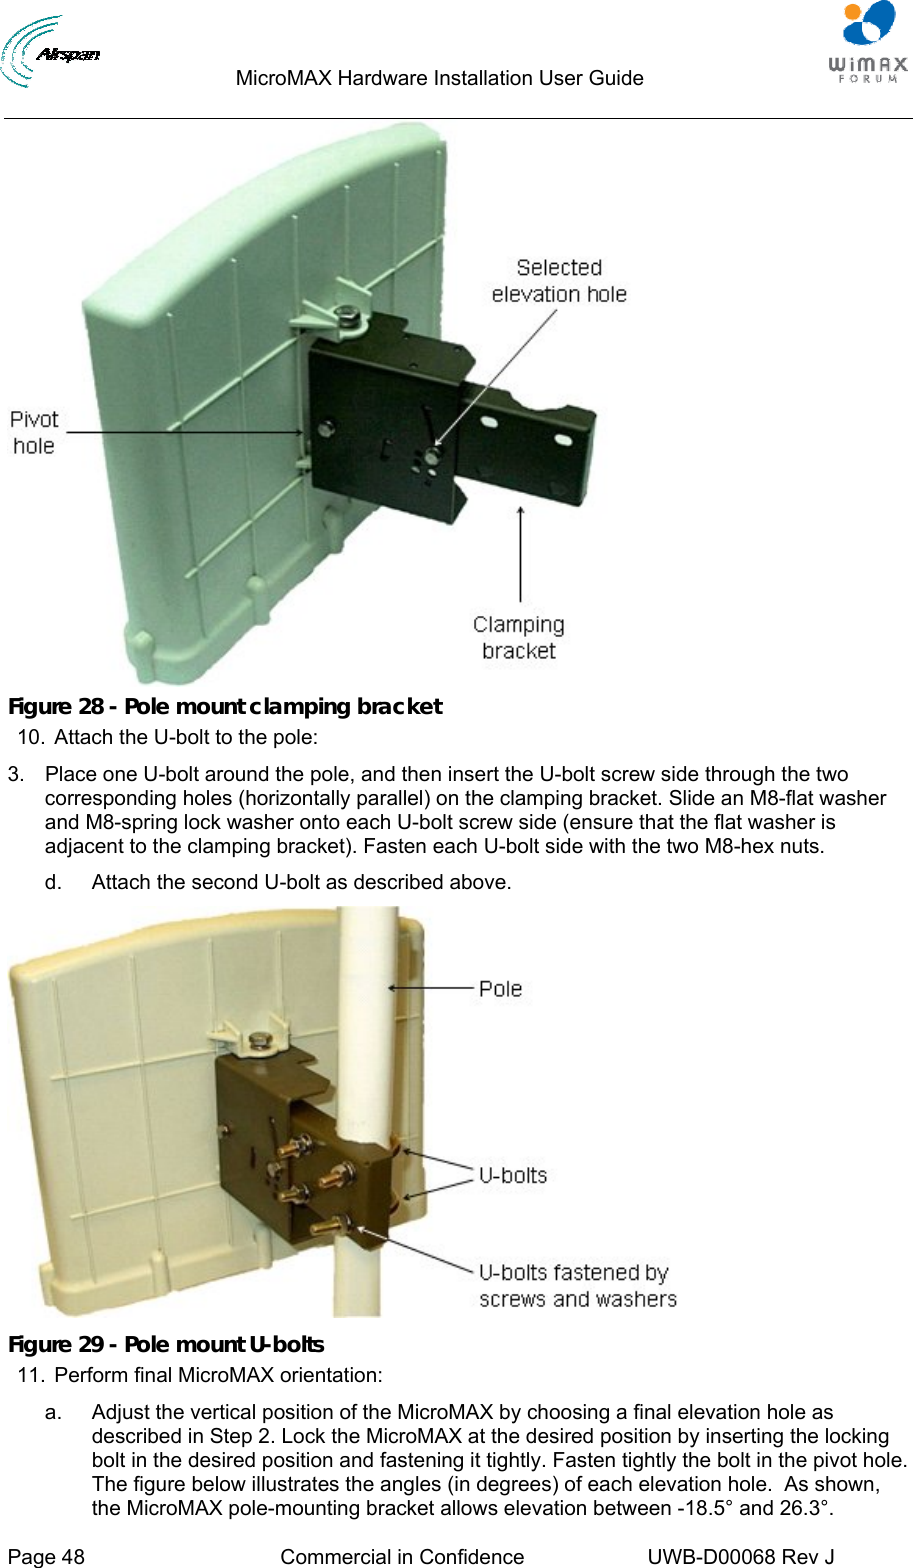                                  MicroMAX Hardware Installation User Guide     Page 48  Commercial in Confidence  UWB-D00068 Rev J    Figure 28 - Pole mount clamping bracket 10.  Attach the U-bolt to the pole: 3.  Place one U-bolt around the pole, and then insert the U-bolt screw side through the two corresponding holes (horizontally parallel) on the clamping bracket. Slide an M8-flat washer and M8-spring lock washer onto each U-bolt screw side (ensure that the flat washer is adjacent to the clamping bracket). Fasten each U-bolt side with the two M8-hex nuts. d.  Attach the second U-bolt as described above.  Figure 29 - Pole mount U-bolts 11.  Perform final MicroMAX orientation: a.  Adjust the vertical position of the MicroMAX by choosing a final elevation hole as described in Step 2. Lock the MicroMAX at the desired position by inserting the locking bolt in the desired position and fastening it tightly. Fasten tightly the bolt in the pivot hole. The figure below illustrates the angles (in degrees) of each elevation hole.  As shown, the MicroMAX pole-mounting bracket allows elevation between -18.5° and 26.3°. 